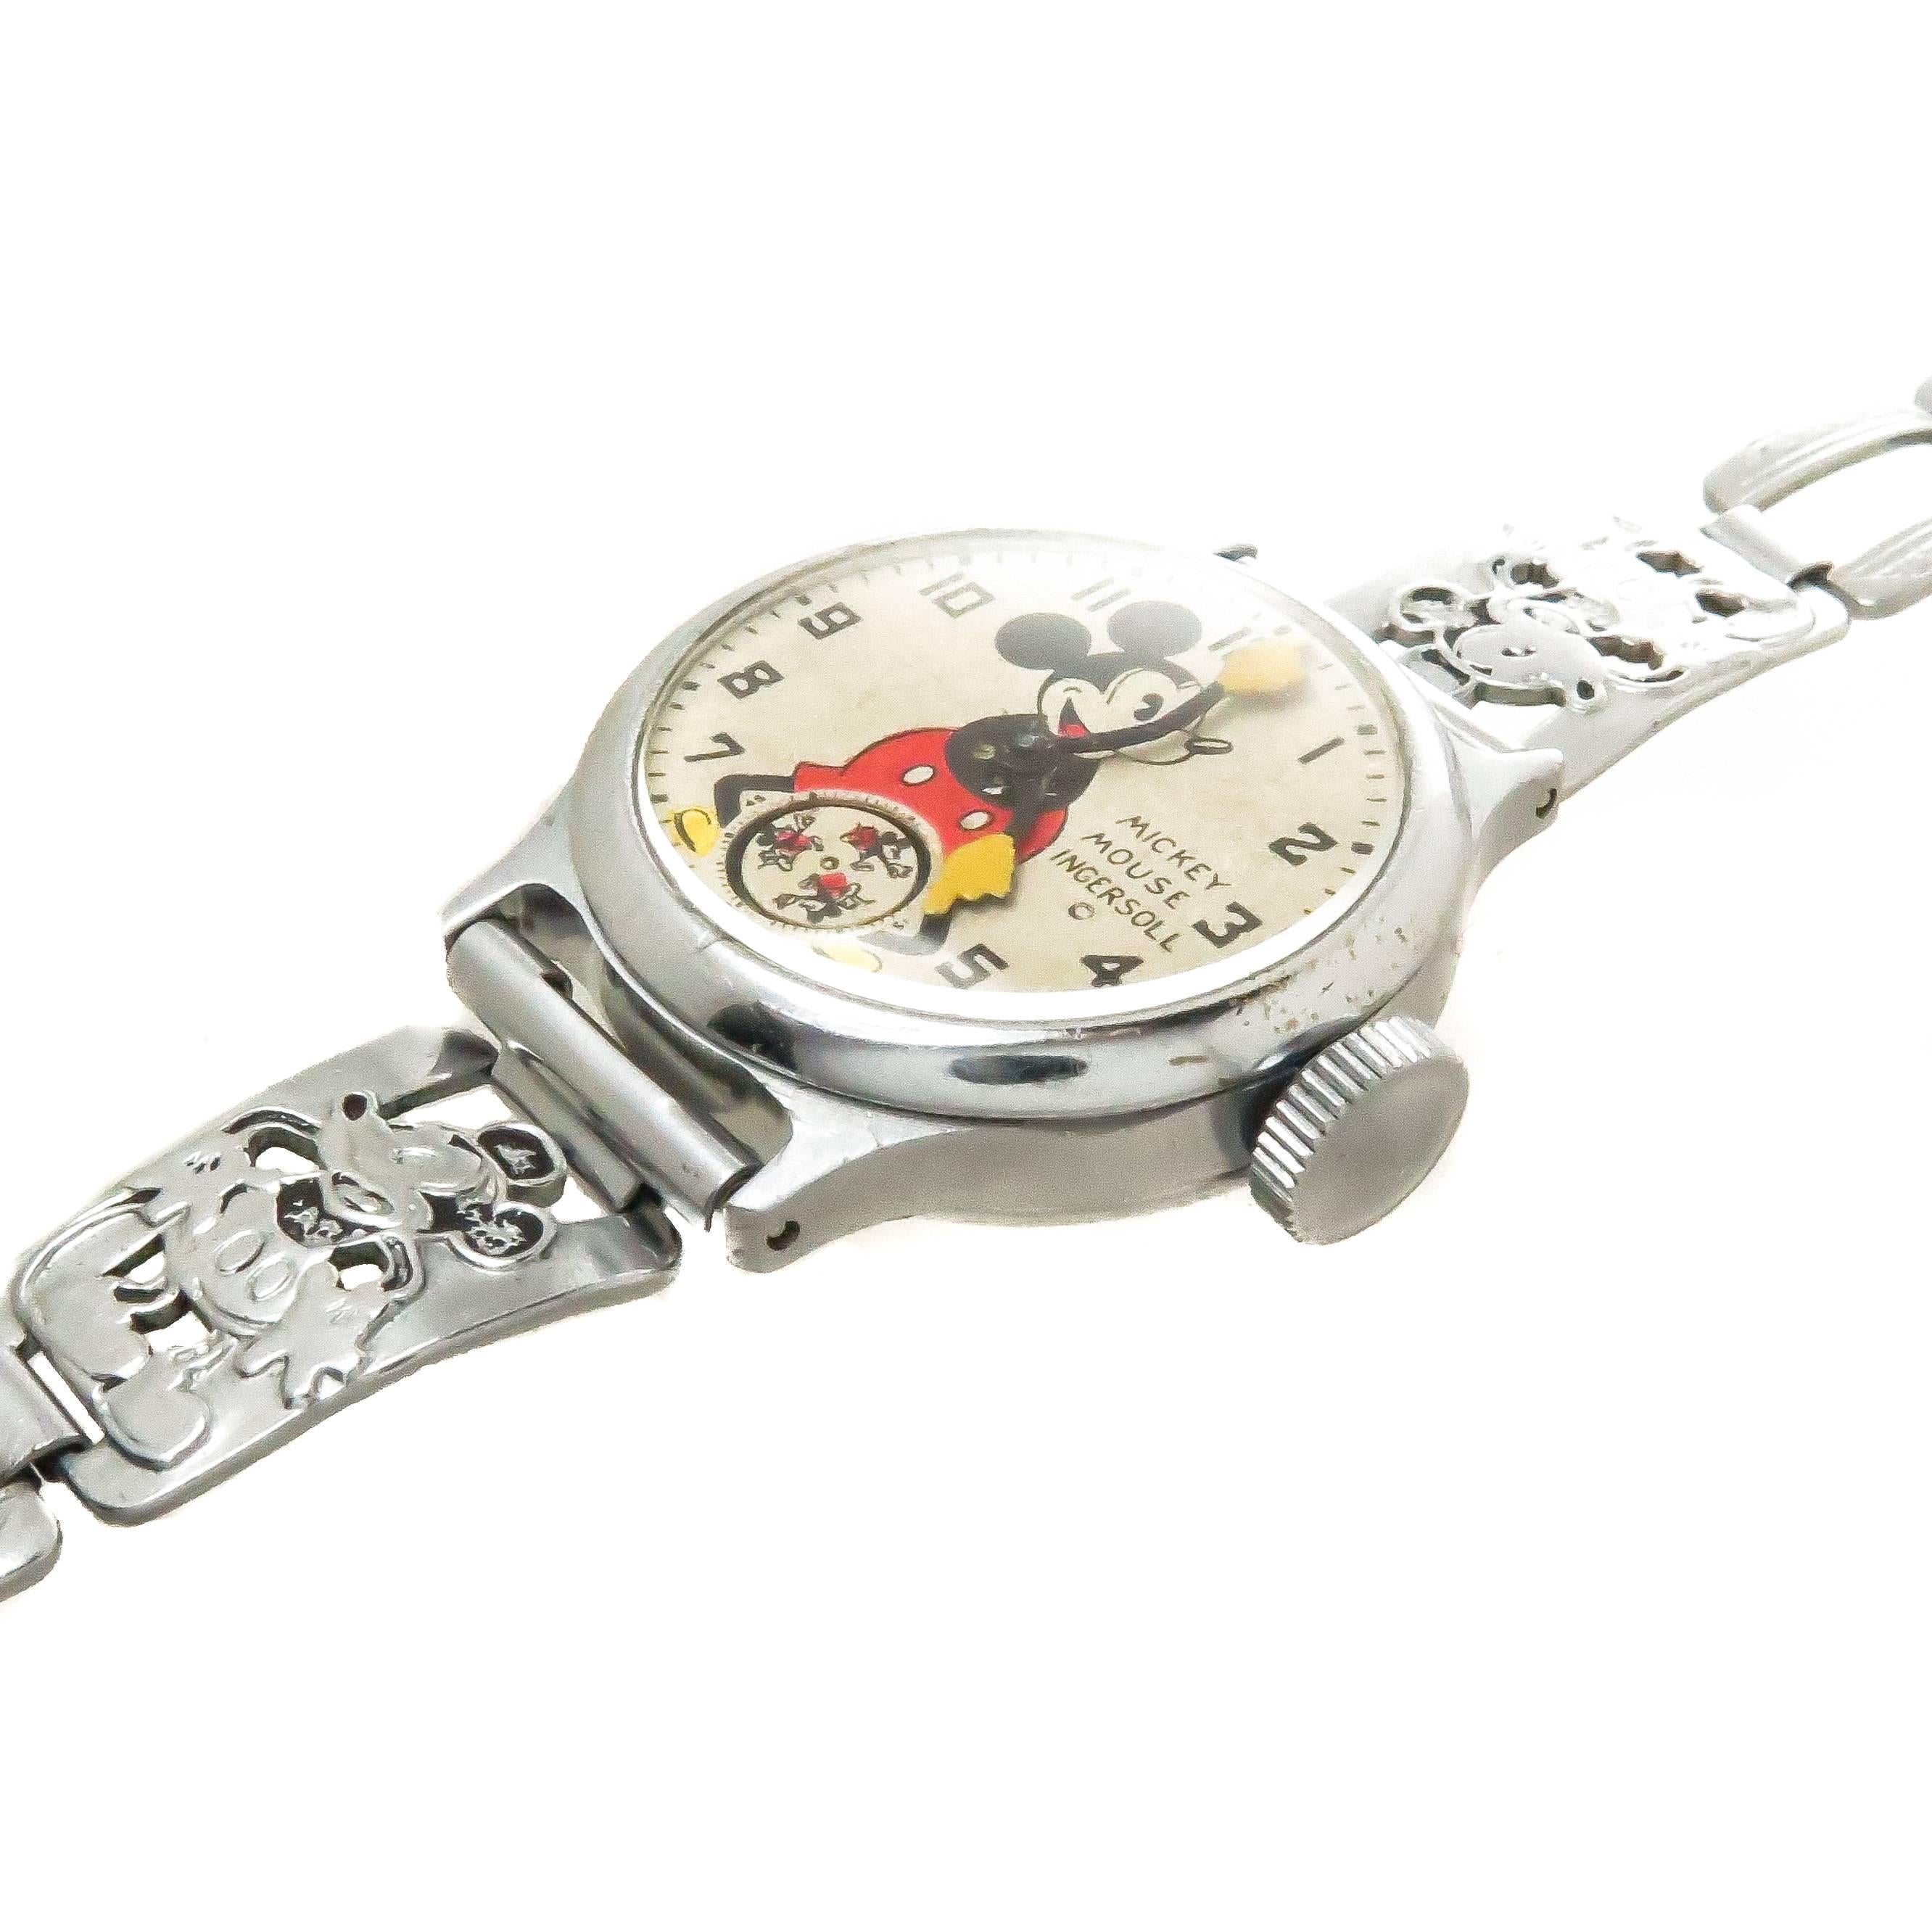 Circa 1933 Ingersoll Mickey Mouse Wrist Watch. This is the Watch that started it all, an incredible success in Marketing and a big money maker for both Disney and Ingersoll. over 2.5 Million were produced between 1933 to 1937. Chromed steel case